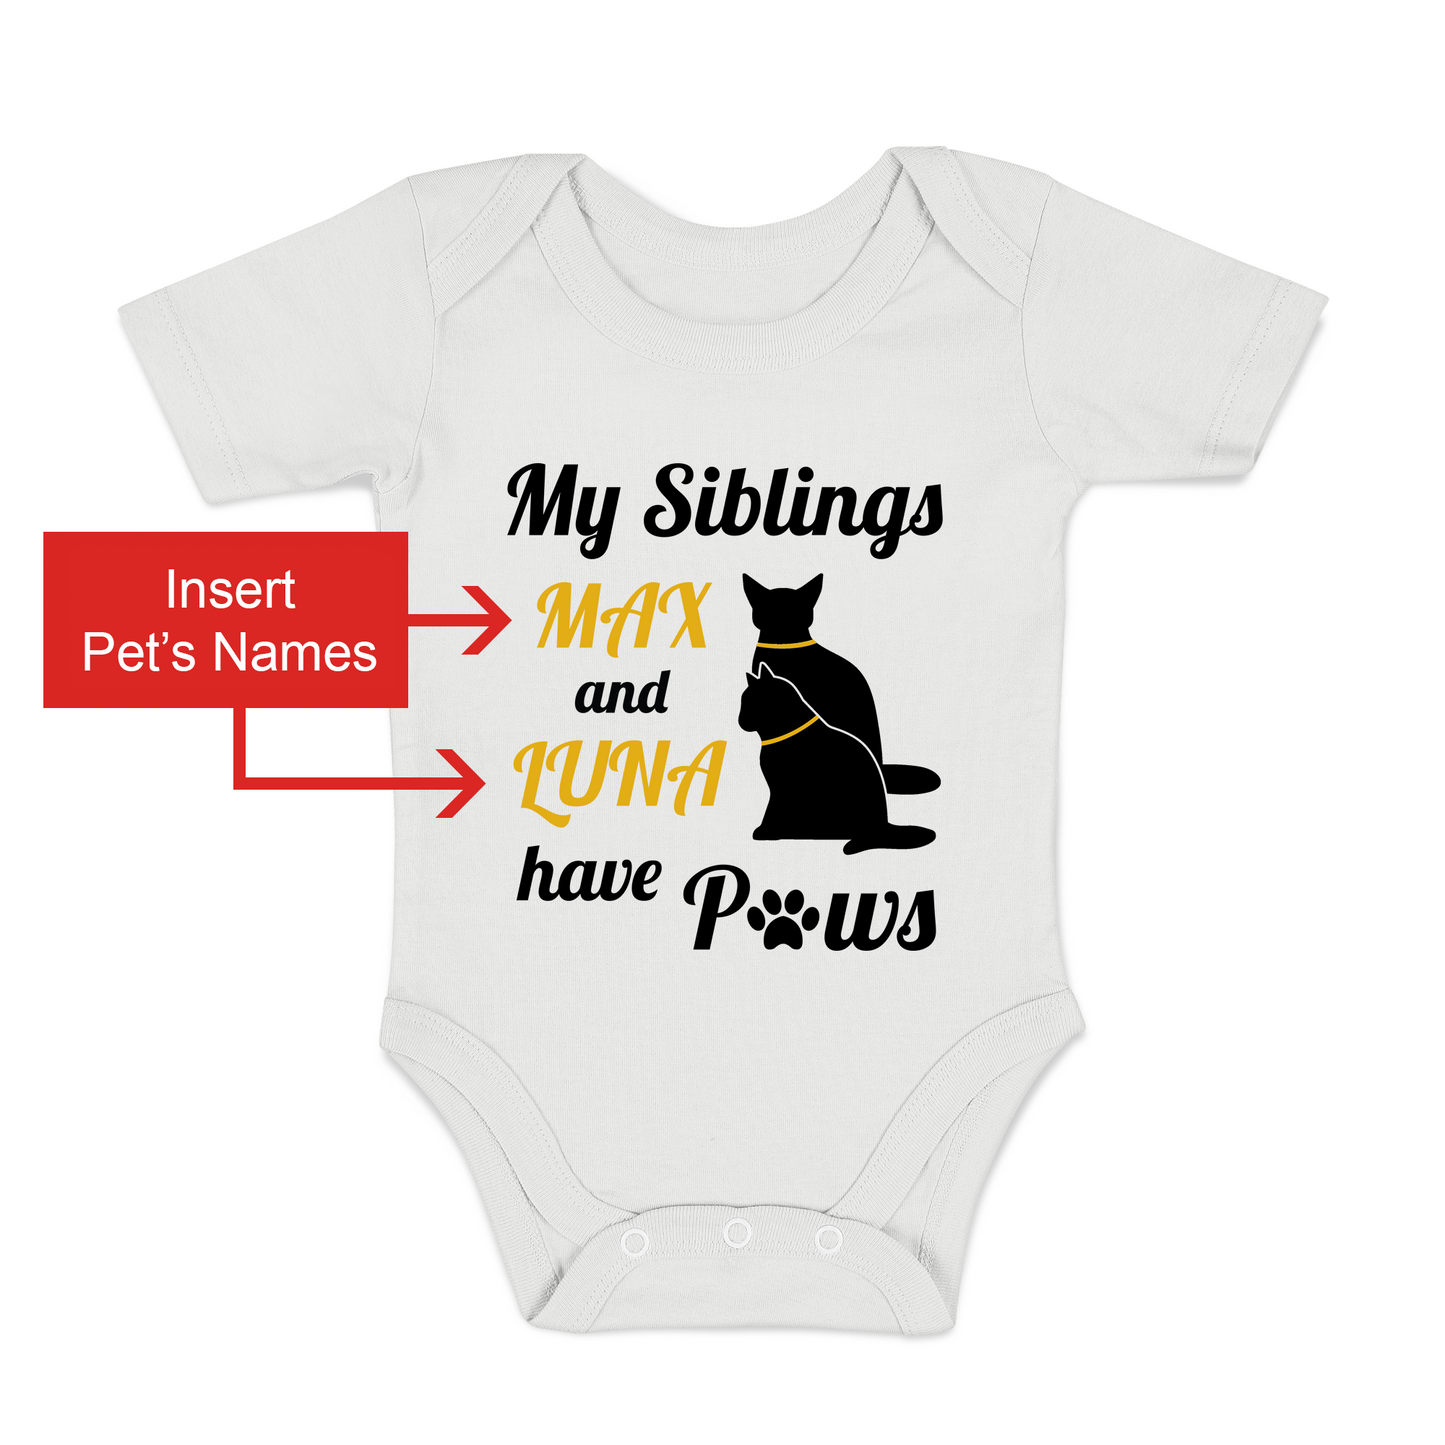 [Personalized] Endanzoo Organic Baby Bodysuit - Pair of CATS I My Siblings have Paws